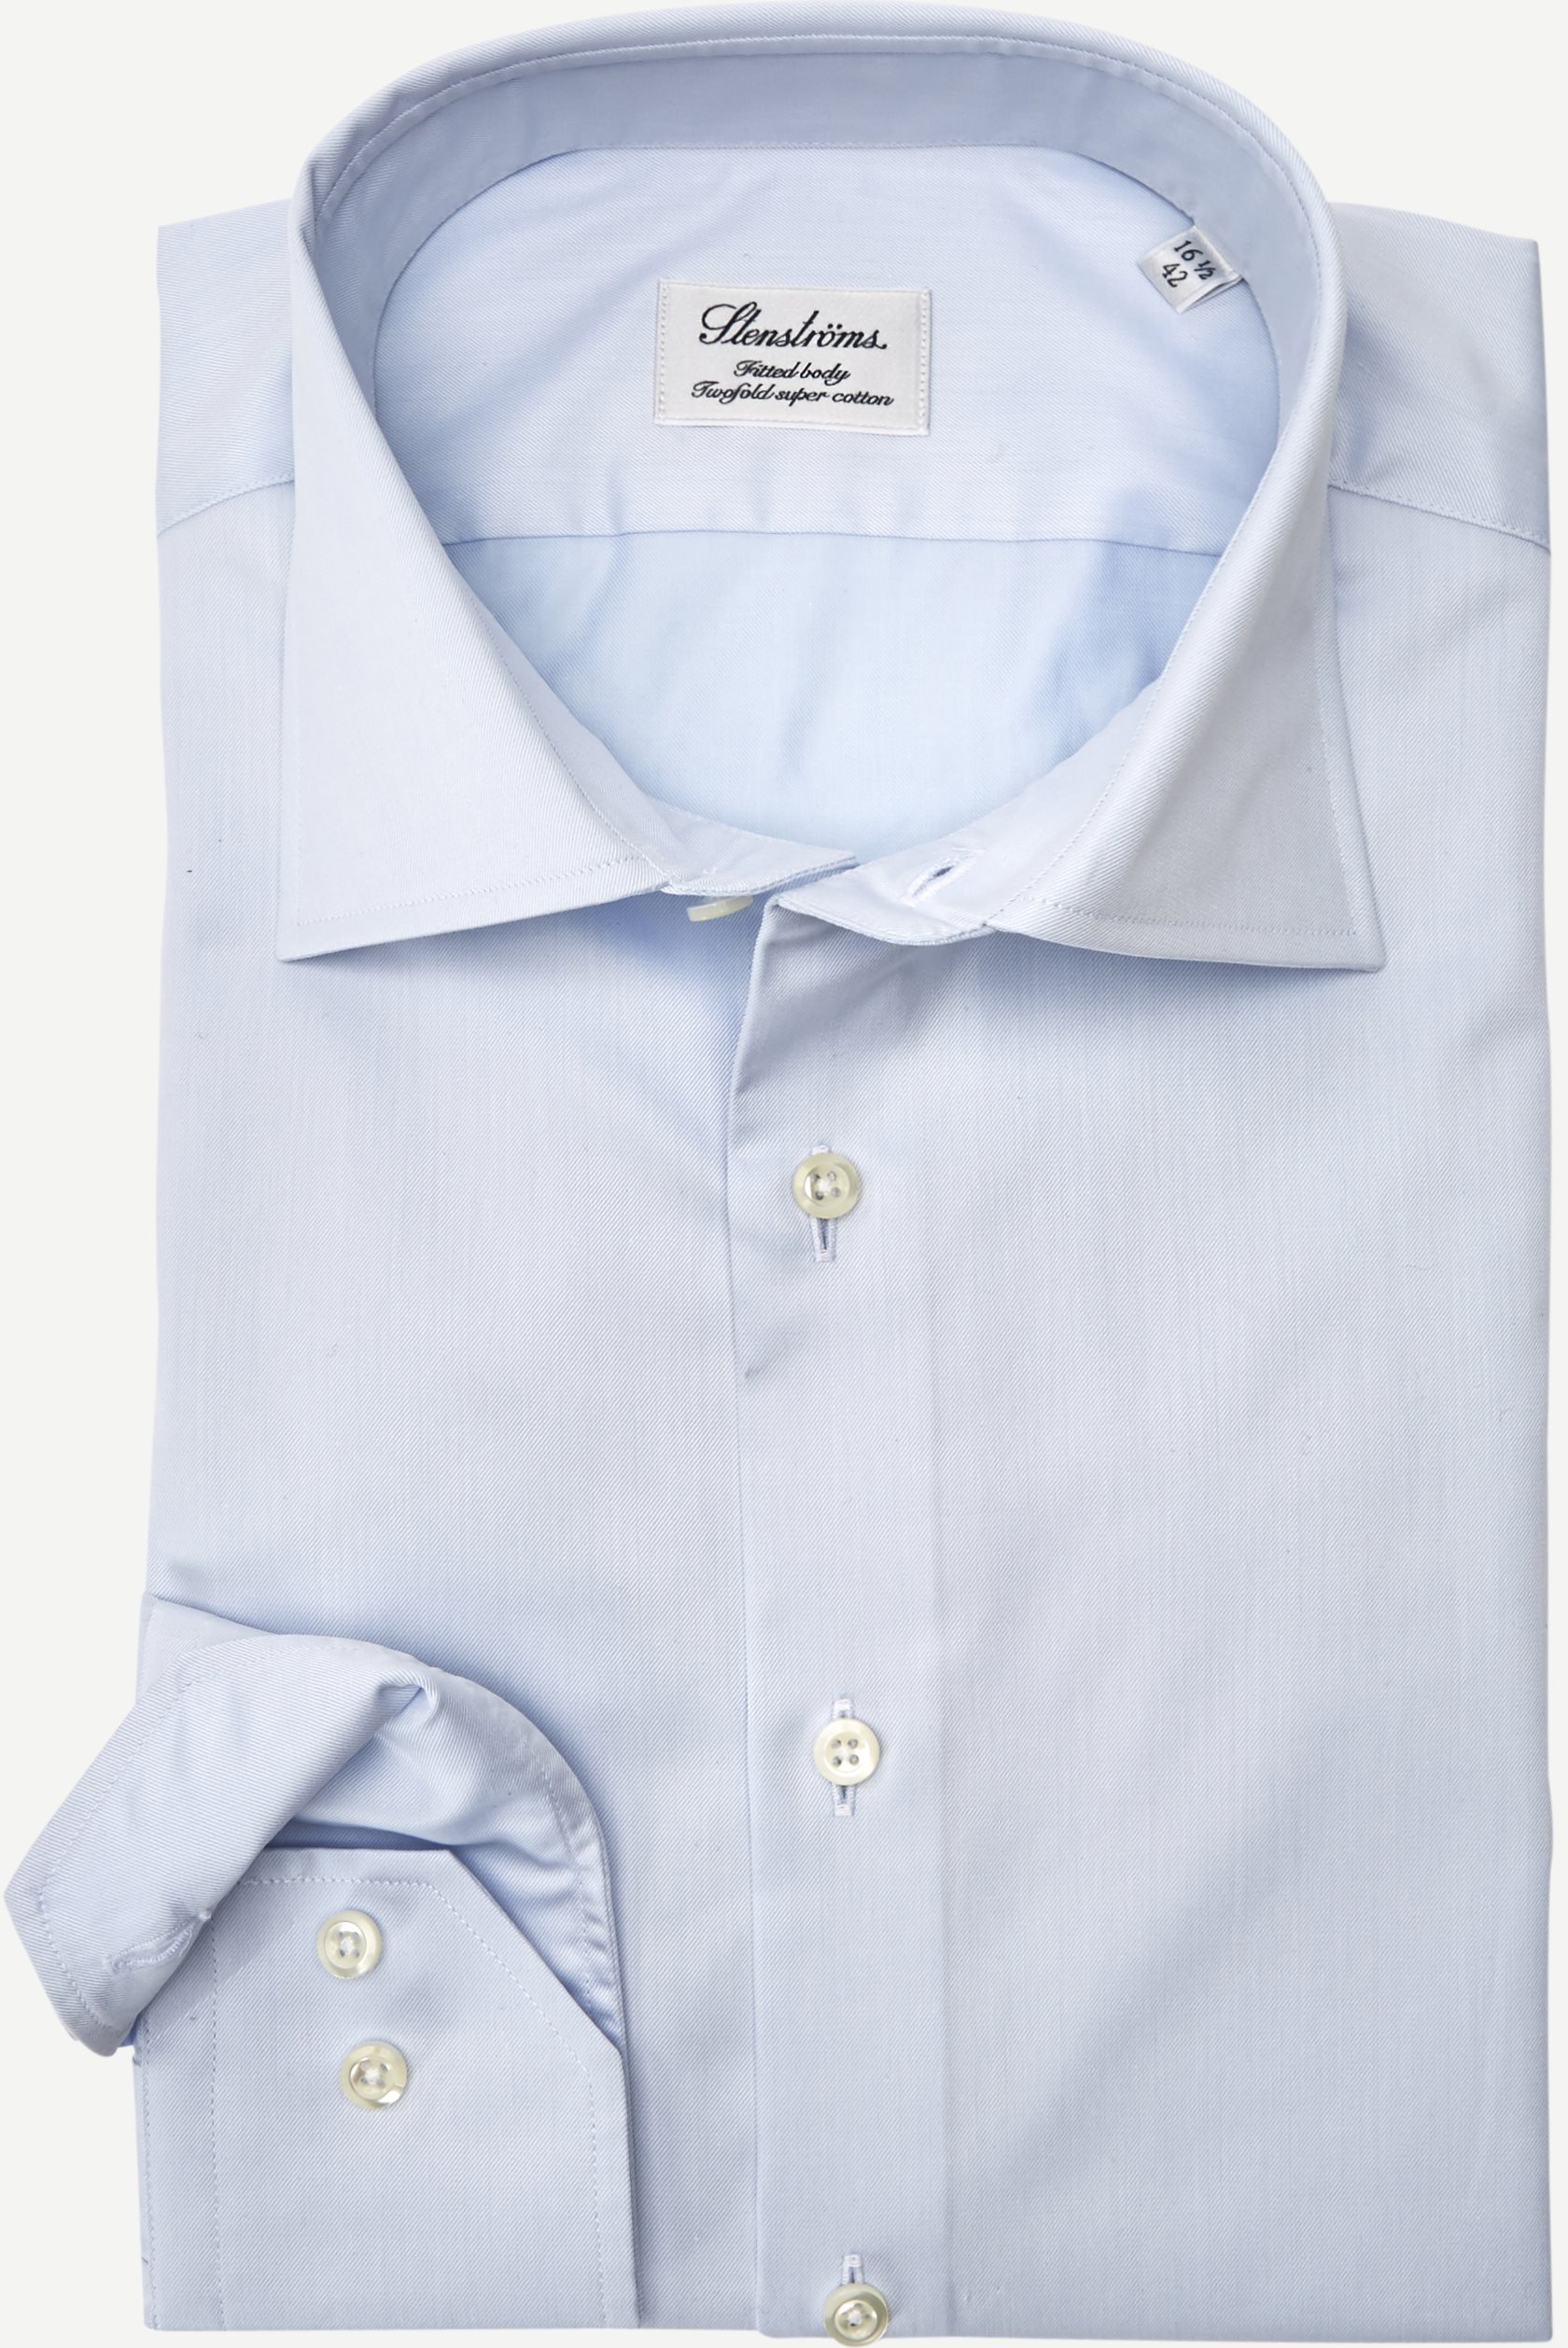 Dress Shirt - Shirts - Fitted body fit - Blue